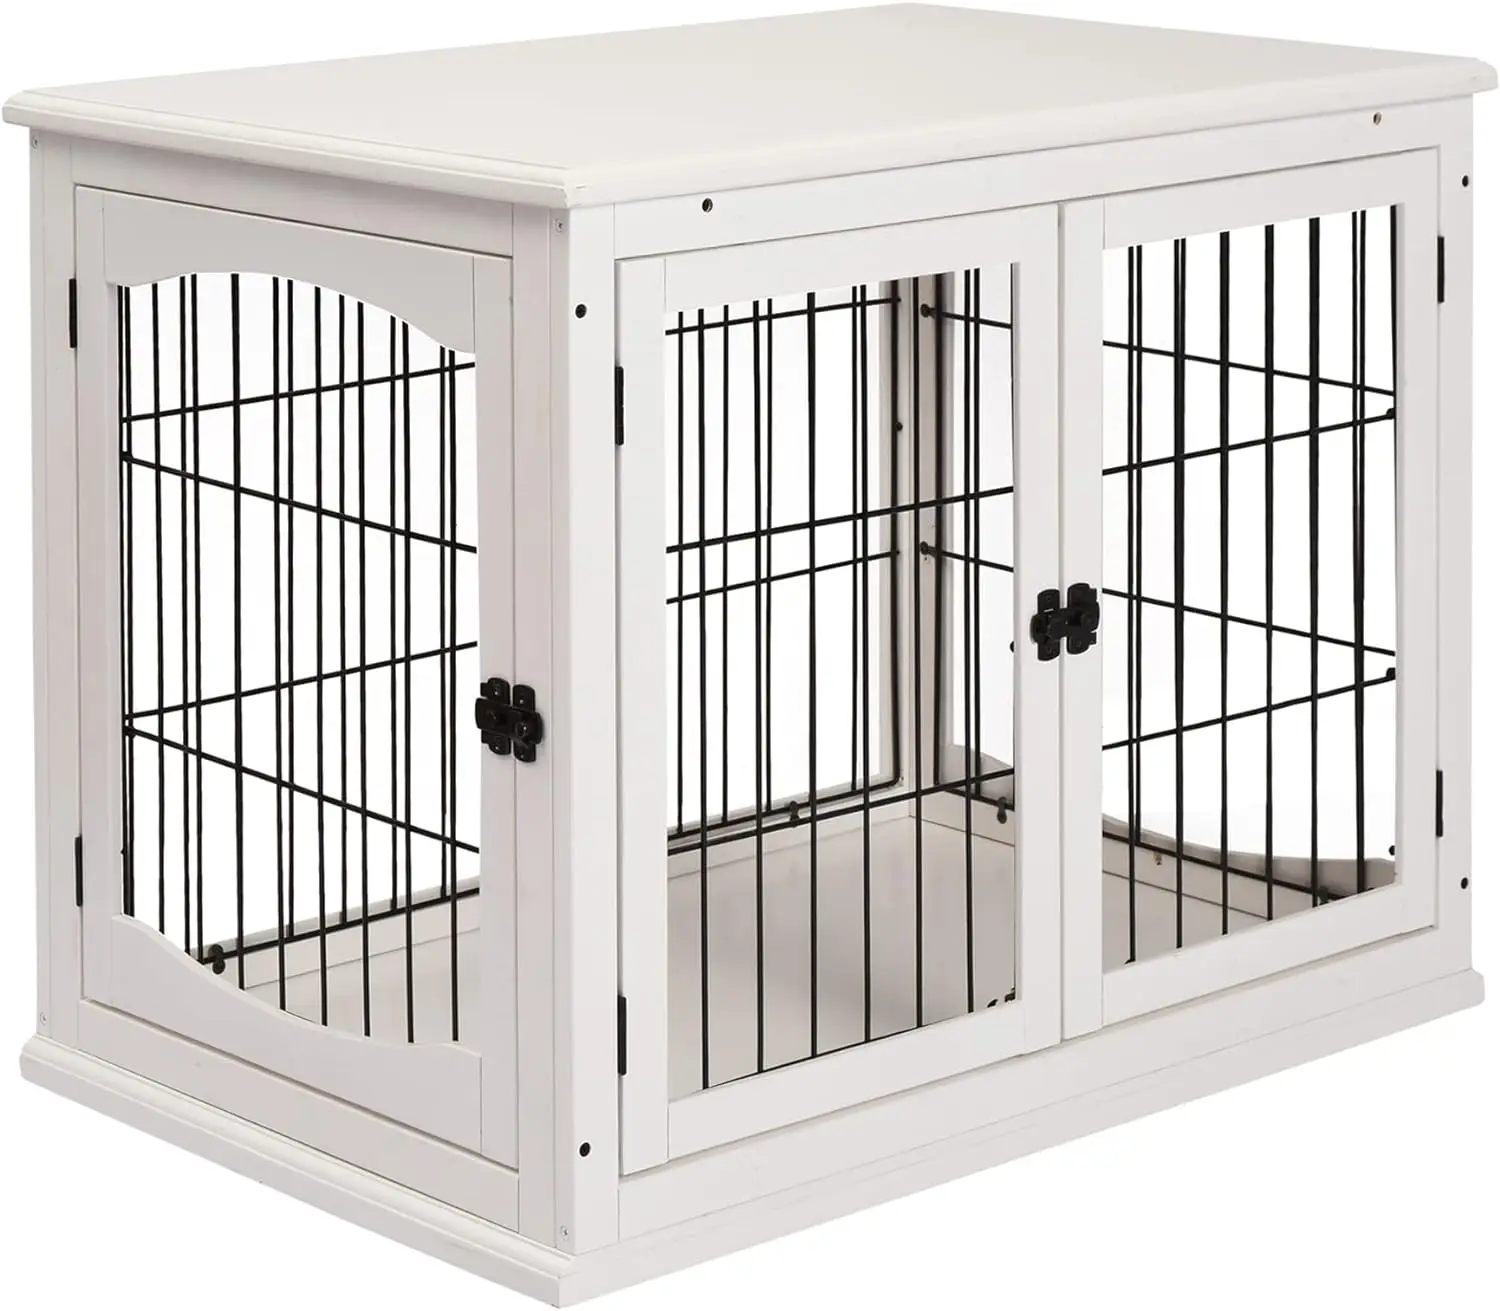 

Dog Crate Furniture, Small Dog Cage End Table with Two Opening Sides, Lockable Door, Puppy Kennel Indoor, Cute and Decorative